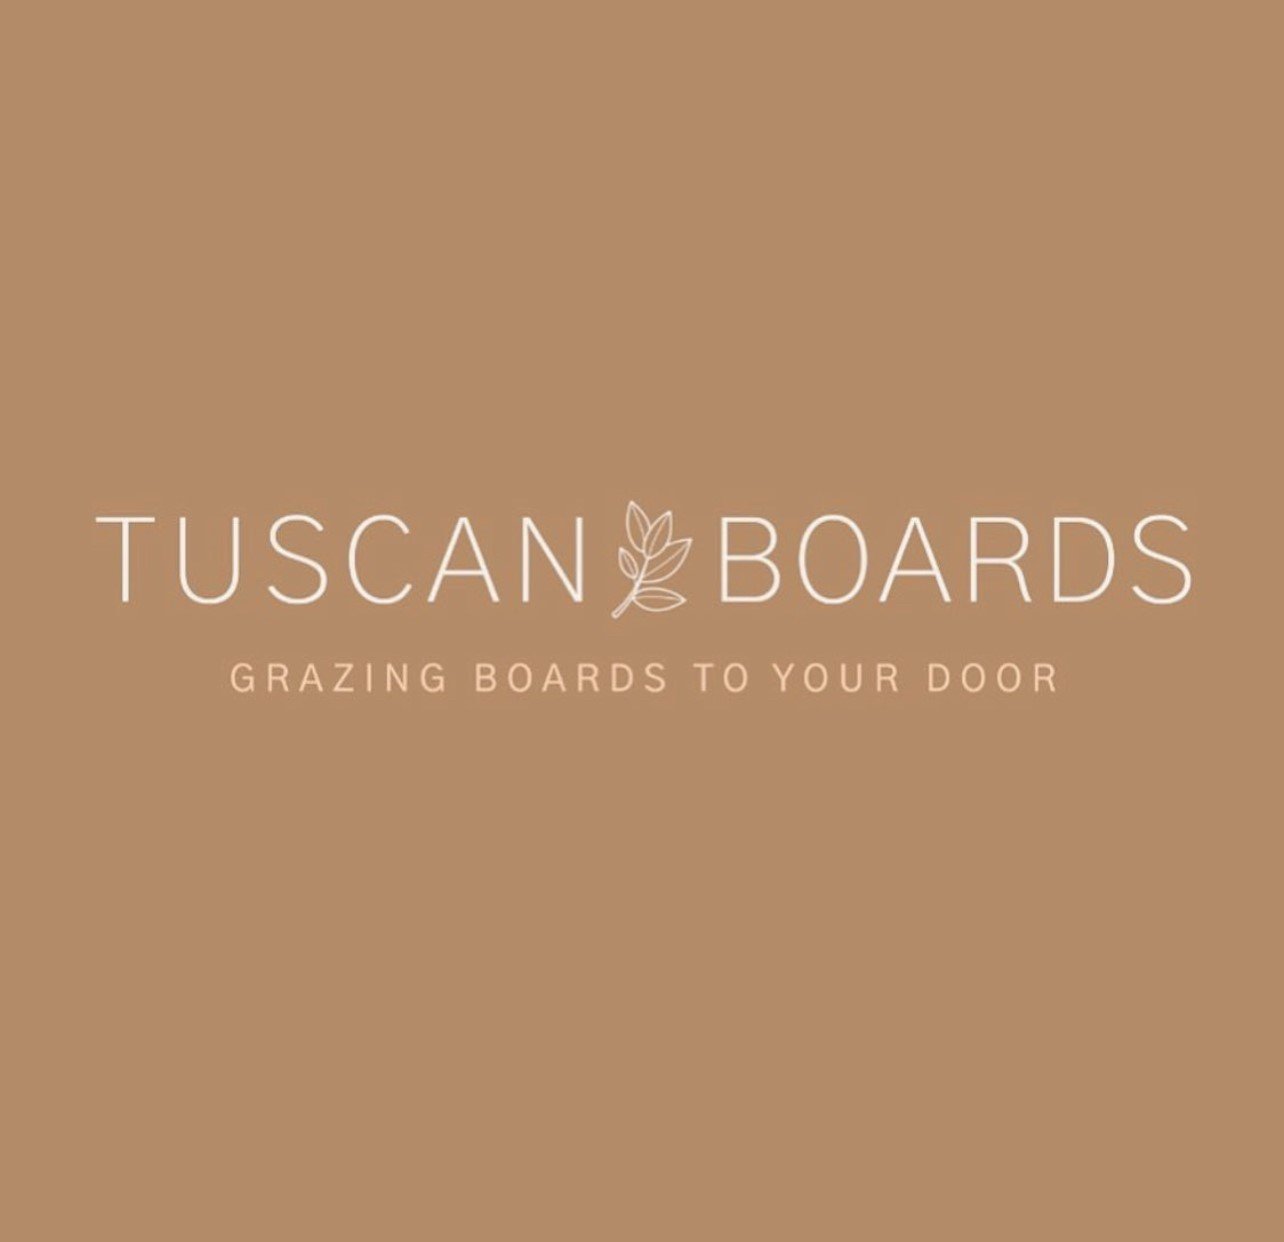 Tuscan boards - Grazing Catering - Luxury picnics